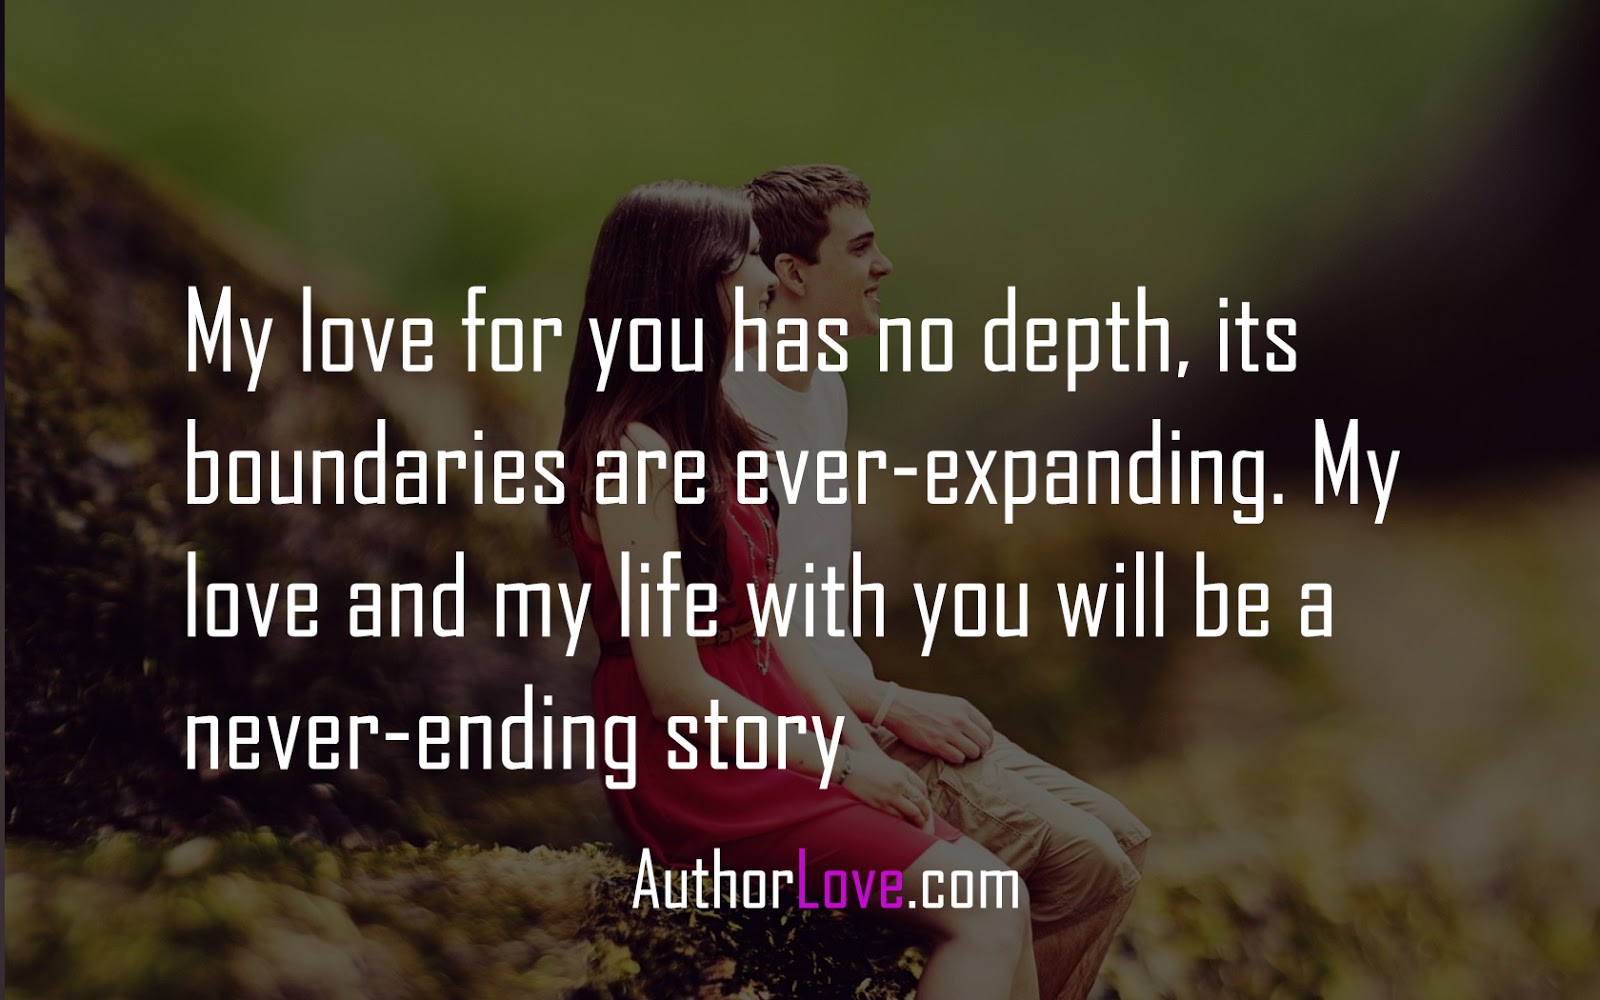 My love for you has no depth its boundaries are ever expanding My love and my life with you will be a never ending story